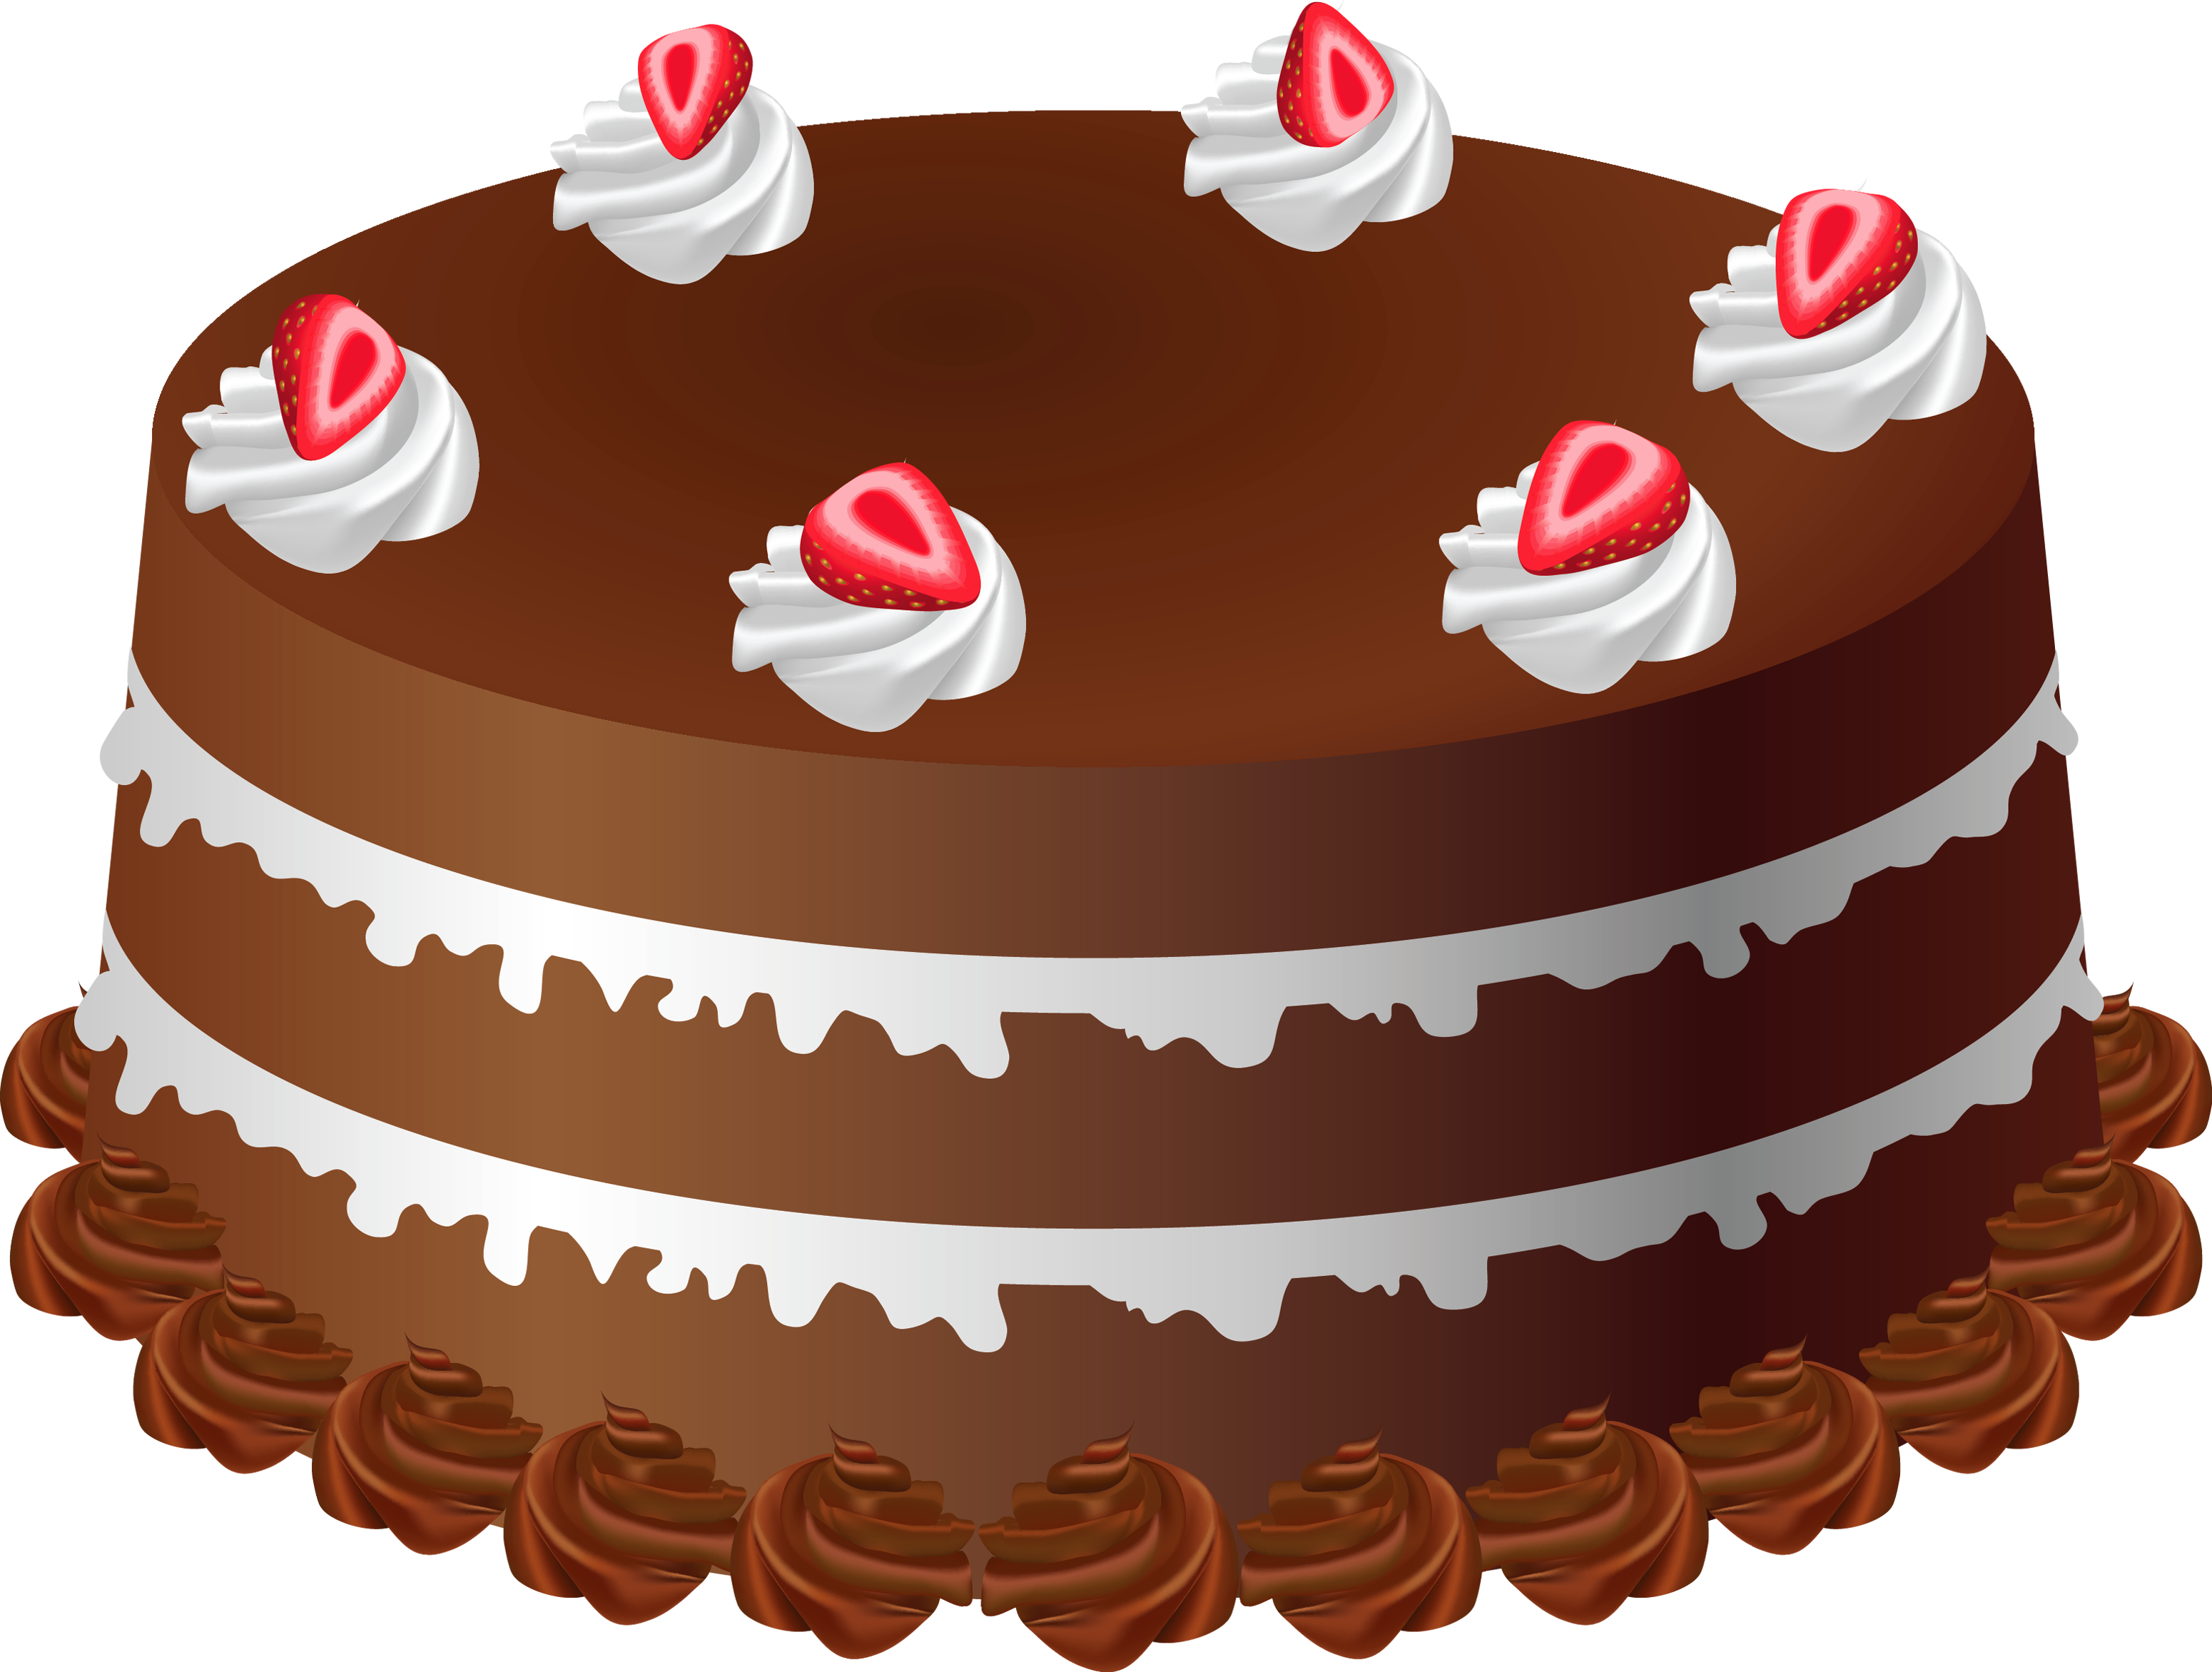 Cake PNG Free Image - PNG All | PNG All